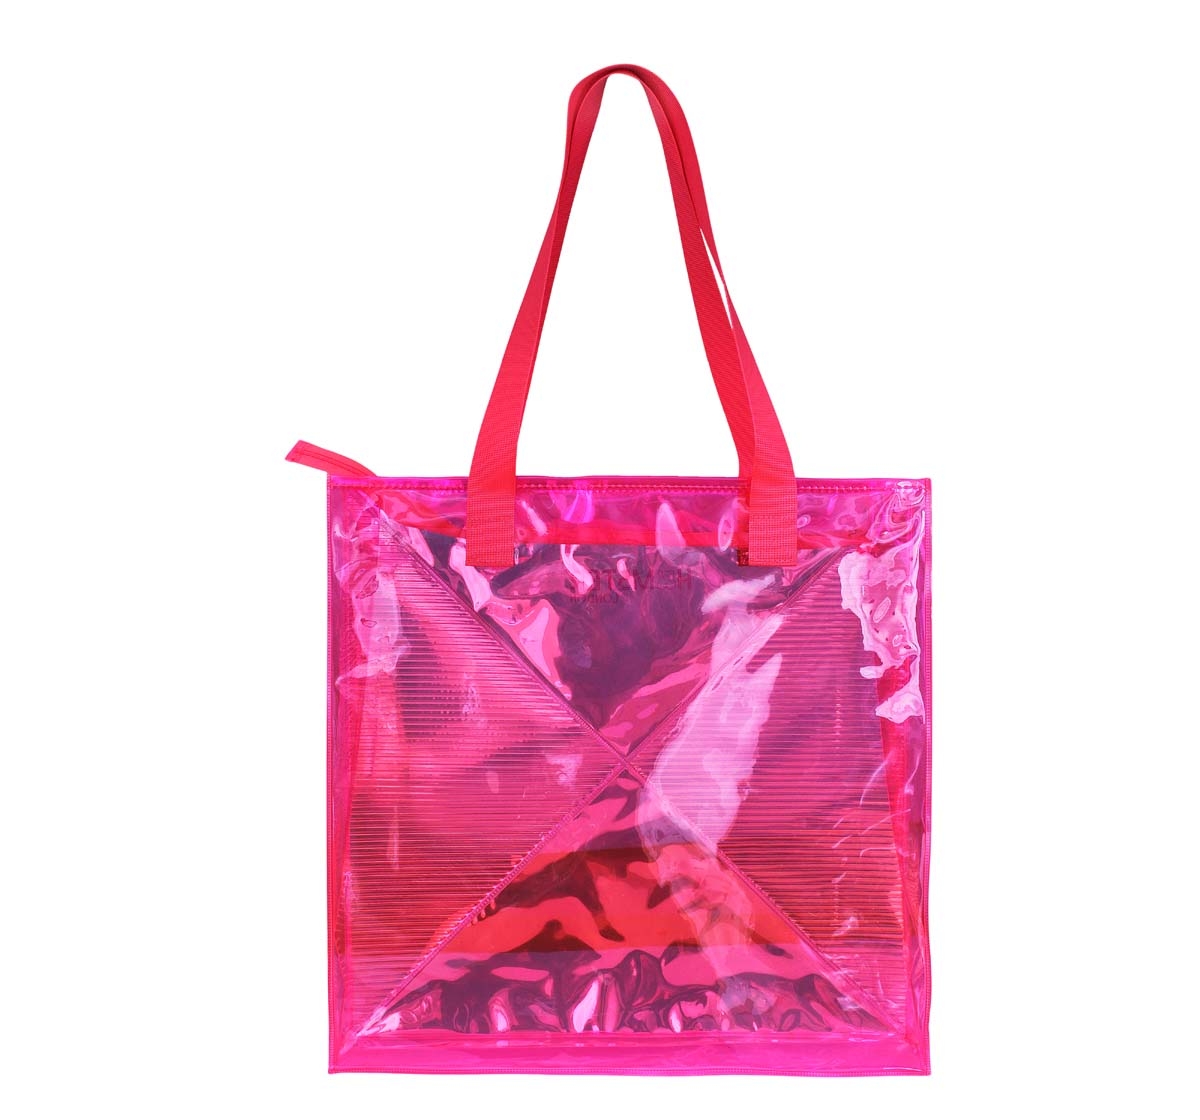 Hamster London | Hamster London Classic Tote Bag Pink Bags for Girls Age 3Y+ (Pink)